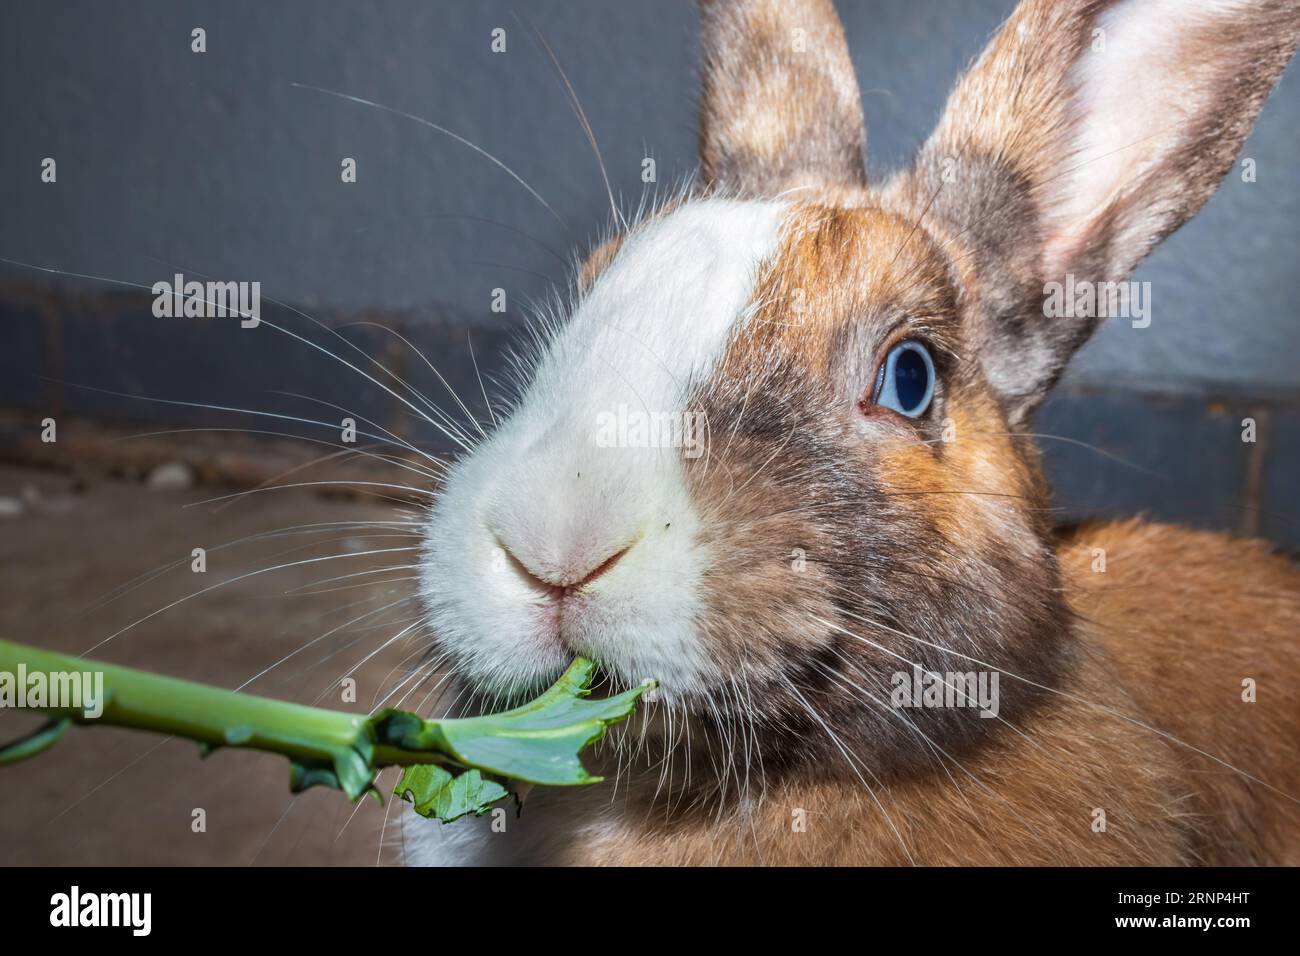 Cute domestic family pet rabbit, Cape Town, South Africa Stock Photo